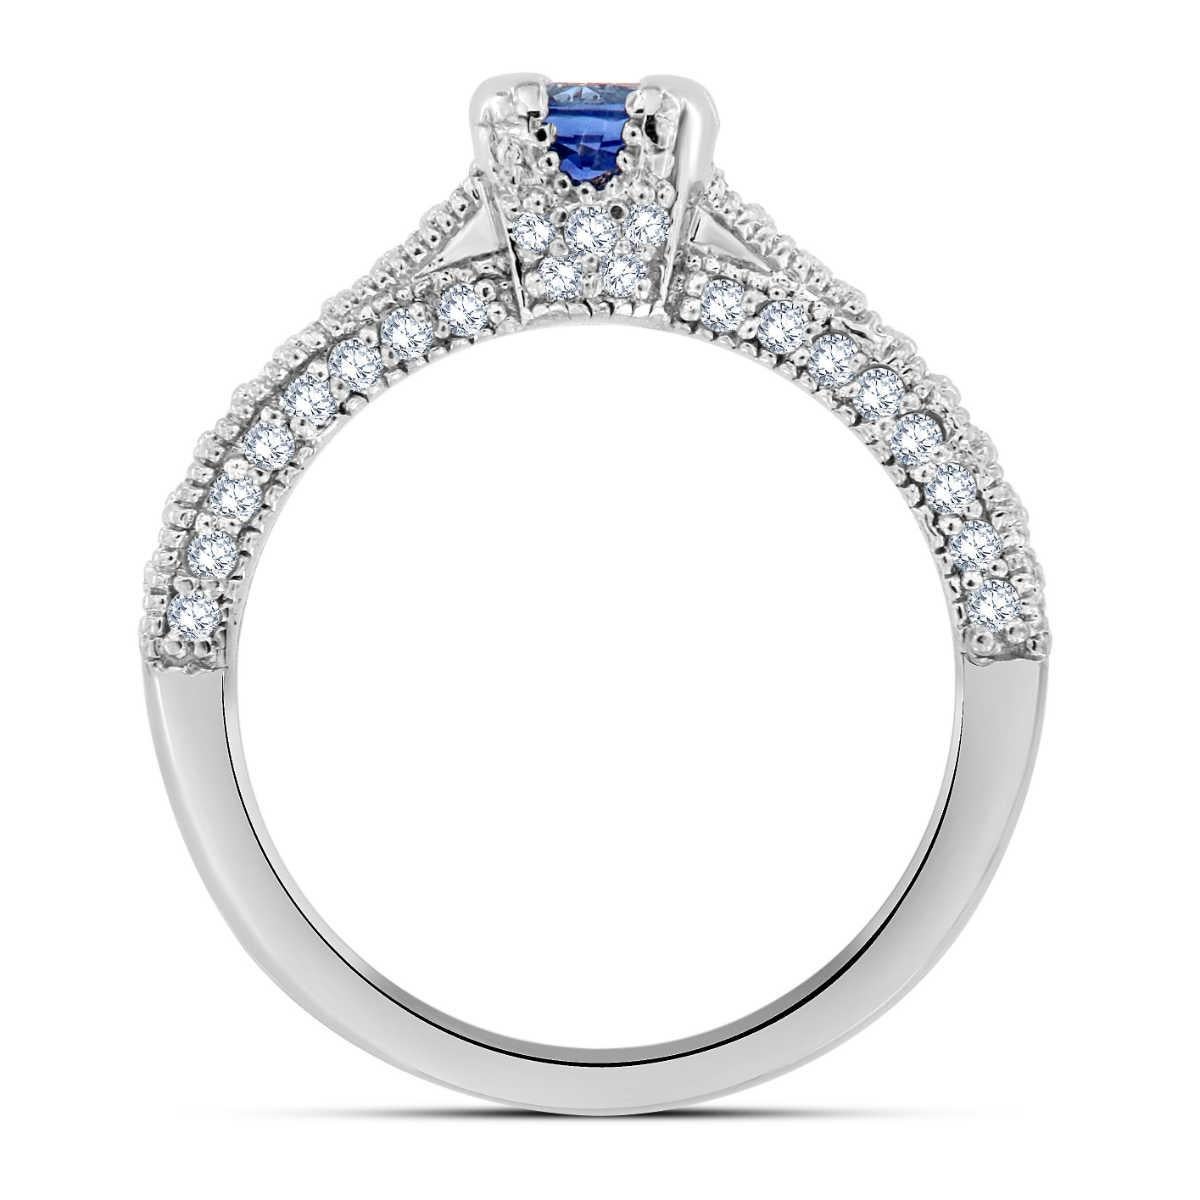 This 18K white gold ring features a 0.63-carat round-shaped Sri-Lankan Blue Sapphire. An elegant drape of 0.54 carat Pave' -set diamonds along three sides of the shank, and the crown completes this stunning ring. Experience the difference in